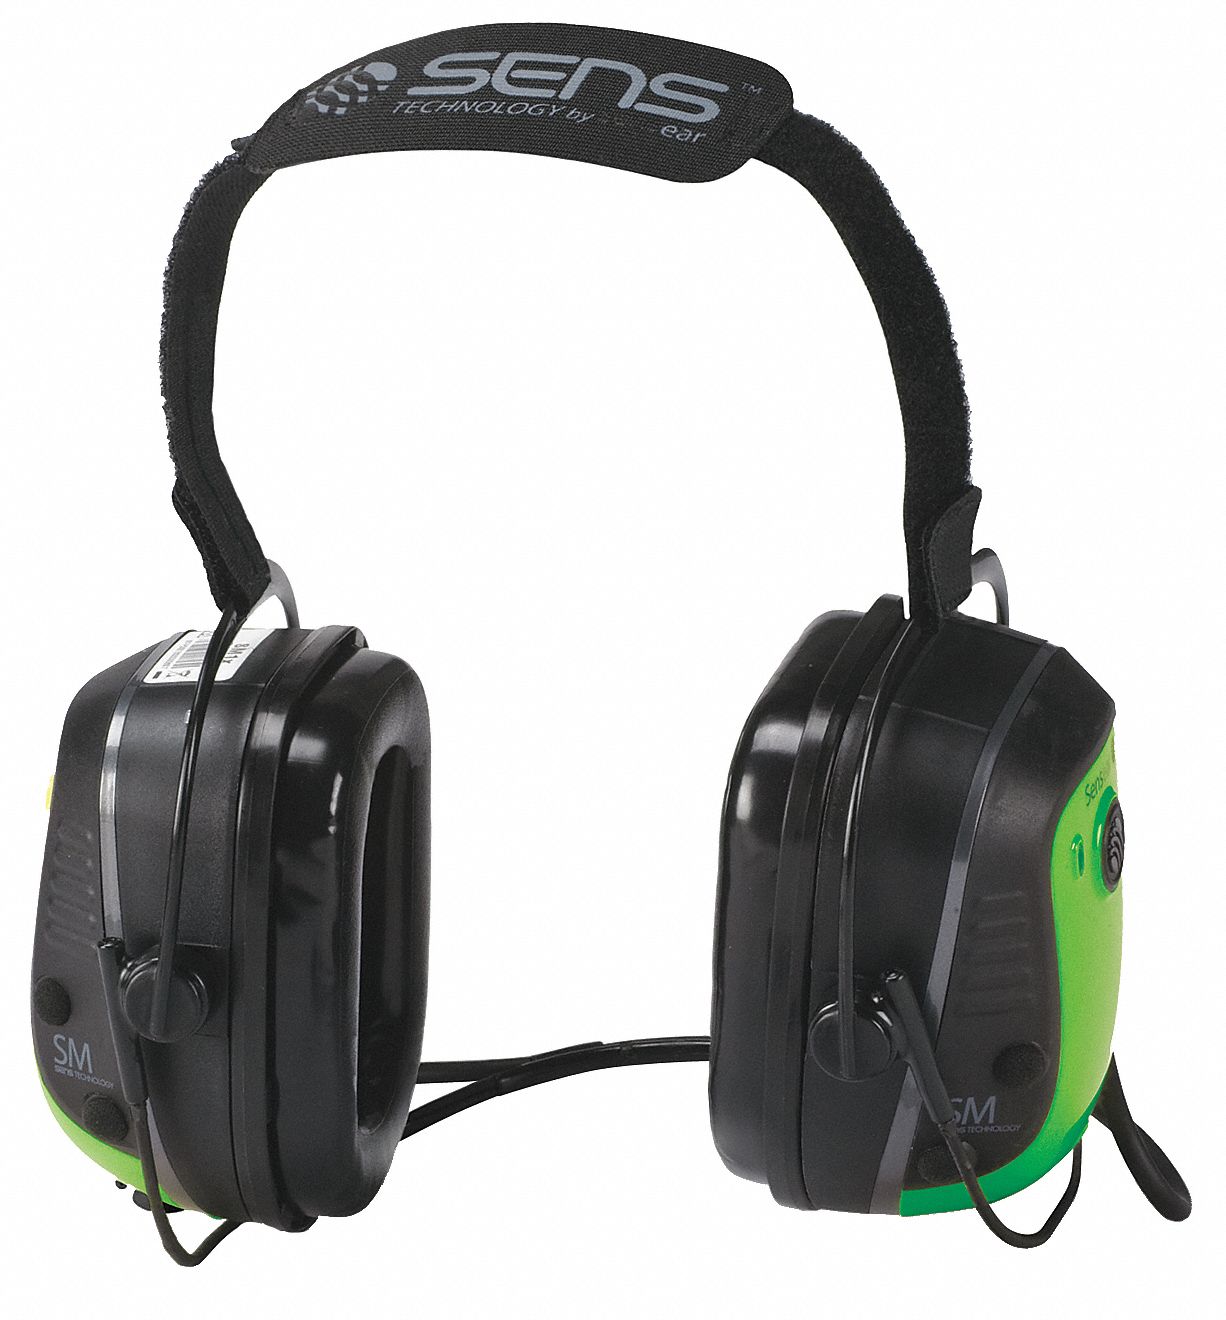 24J937 - Electronic Ear Muff 24dB Behind-the-Neck